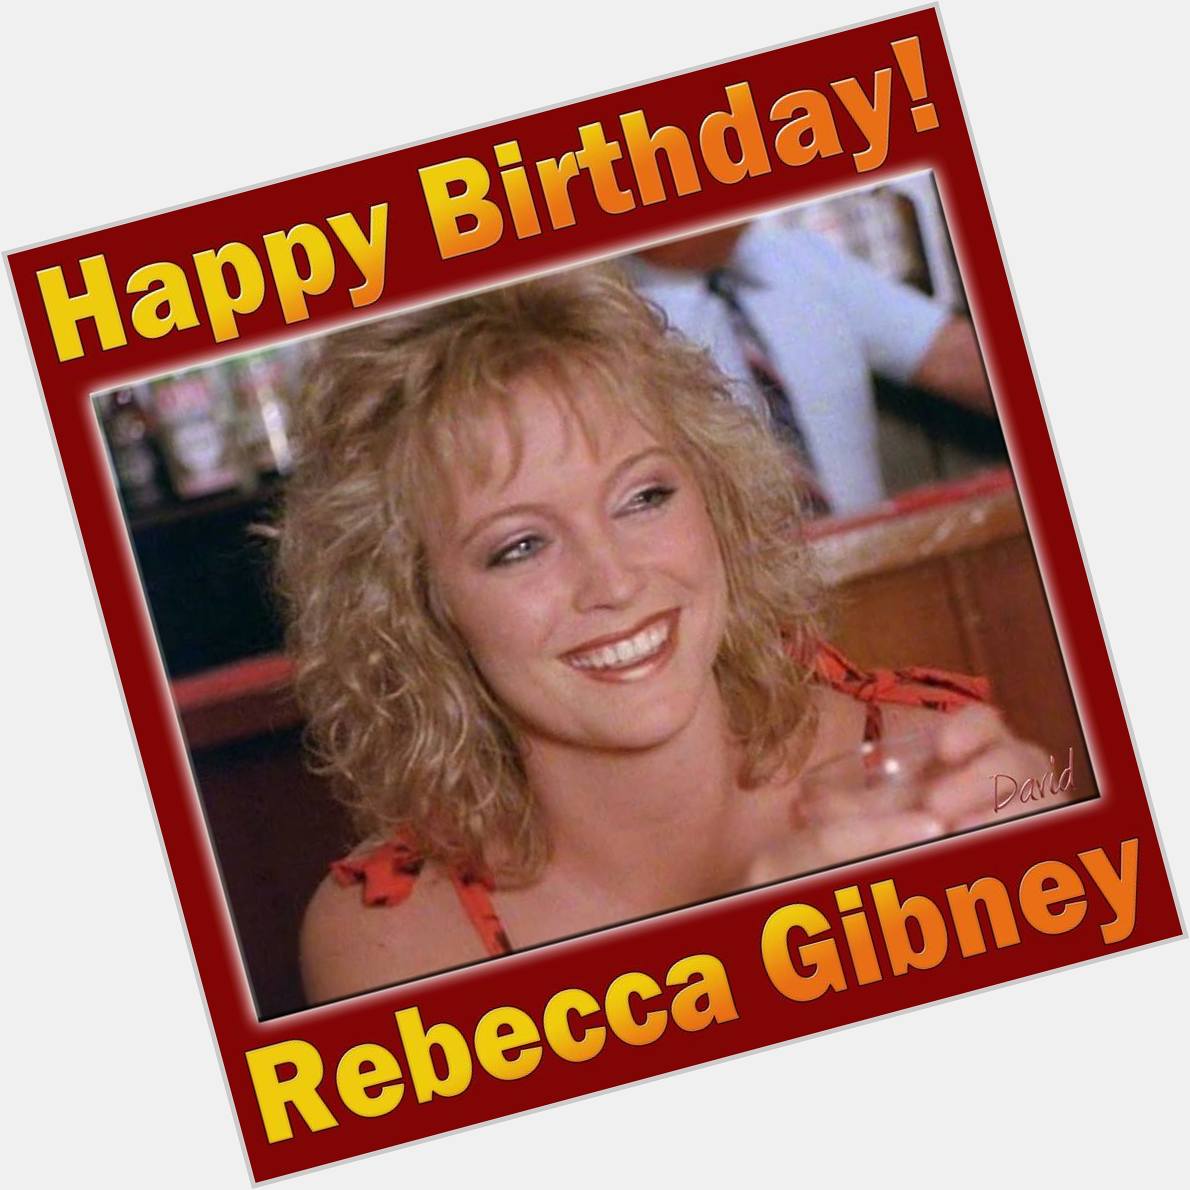 14 December here now ;)

Happy Birthday to Rebecca Gibney today ;)

My Friend David made this ;) 